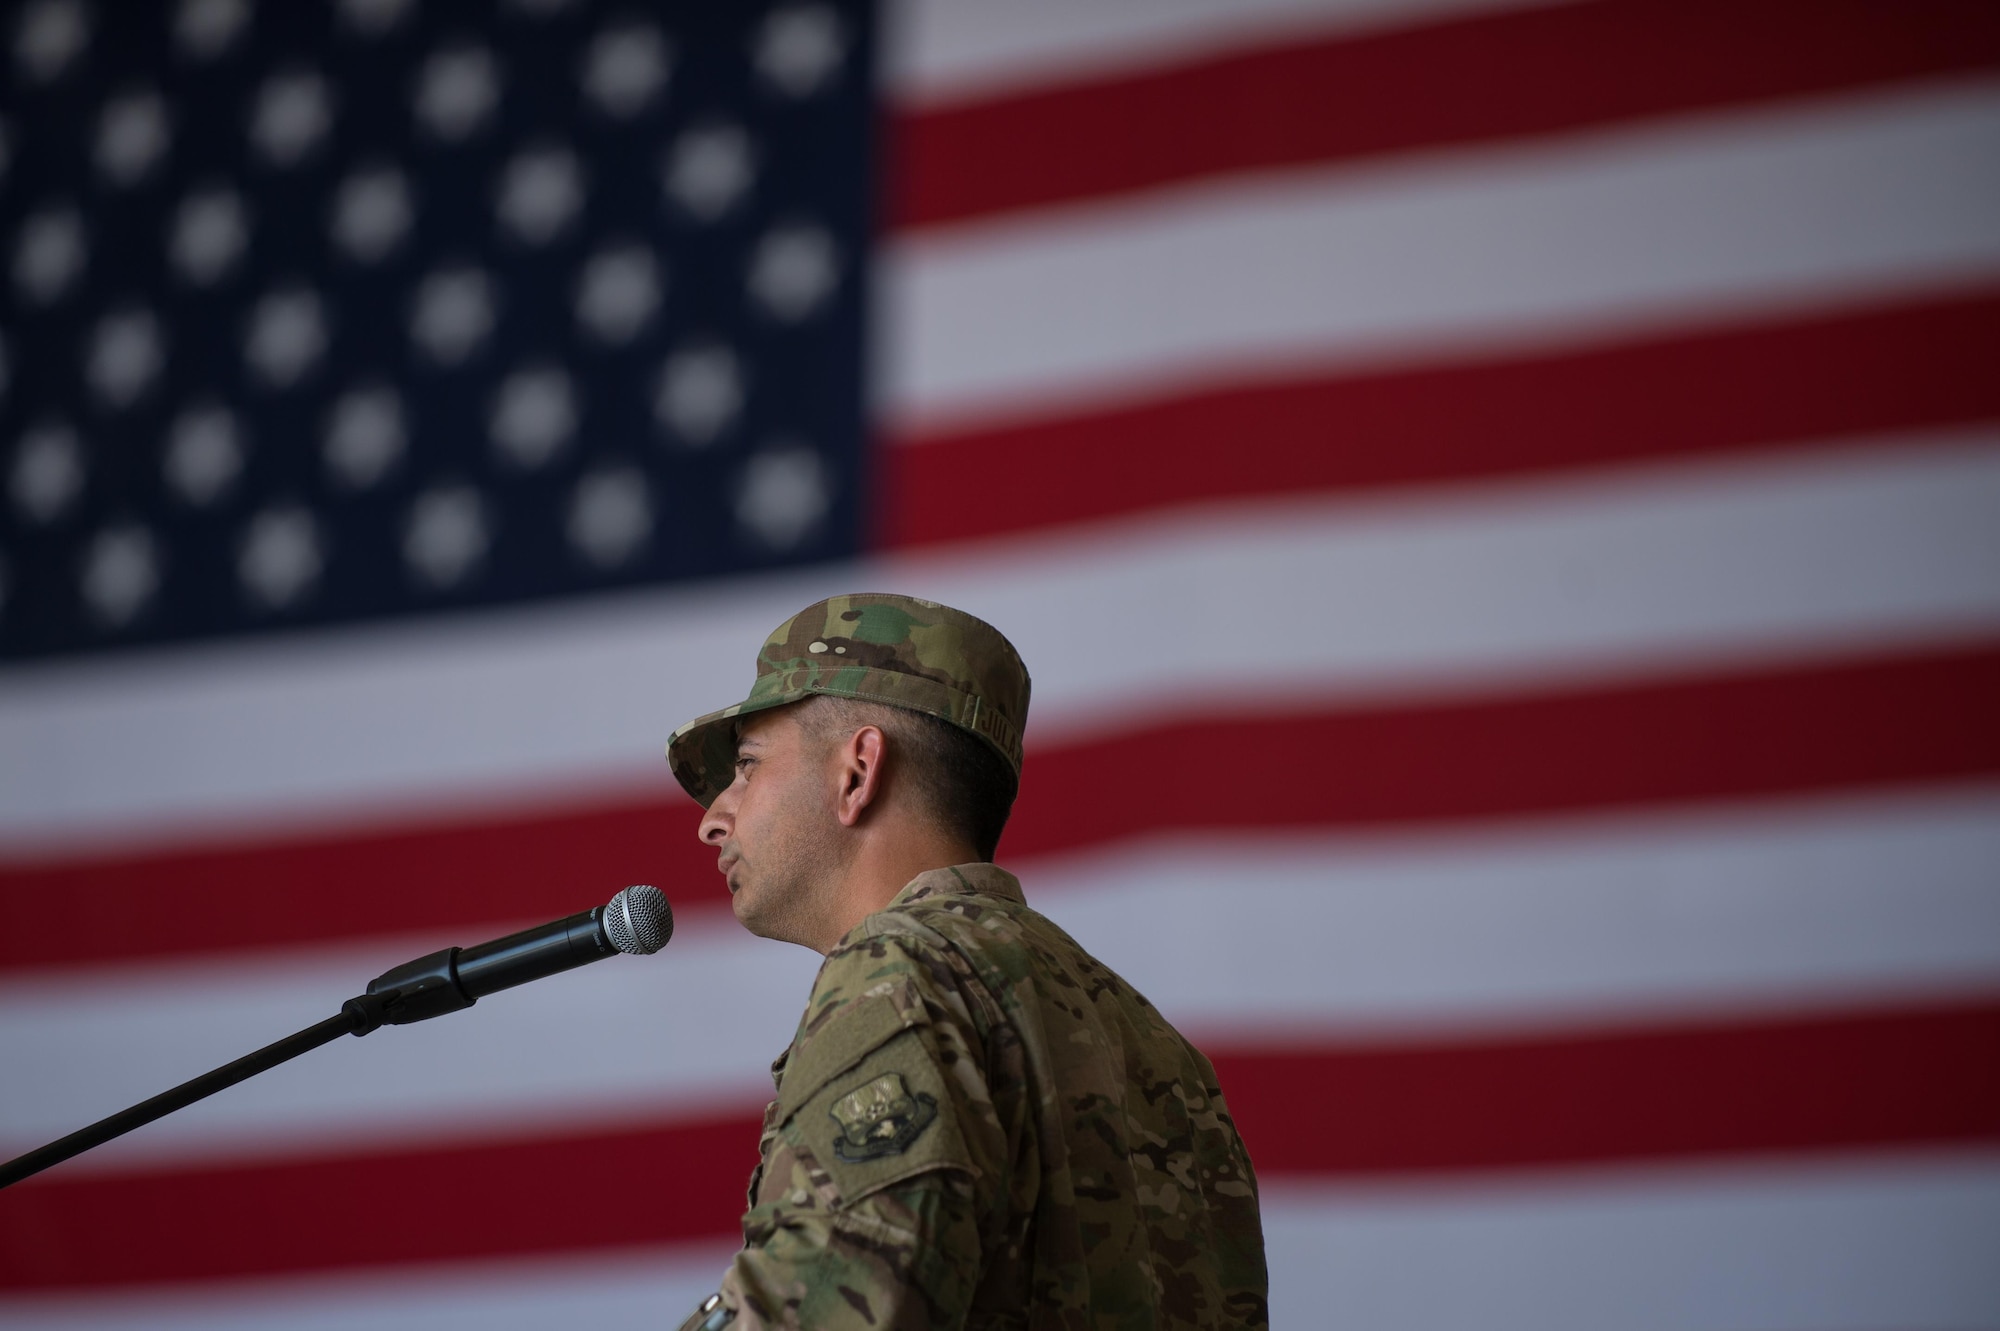 U.S. Air Force Brig. Gen. Dave Julazadeh, 455th Air Expeditionary Wing commander, speaks during the 455th AEW change of command ceremony July 1, 2015, at Bagram Airfield, Afghanistan. During the ceremony Julazadeh took over command of the 455th AEW from Brig. Gen. Mark Kelly.  (U.S. Air Force photo by Tech. Sgt. Joseph Swafford/Released)